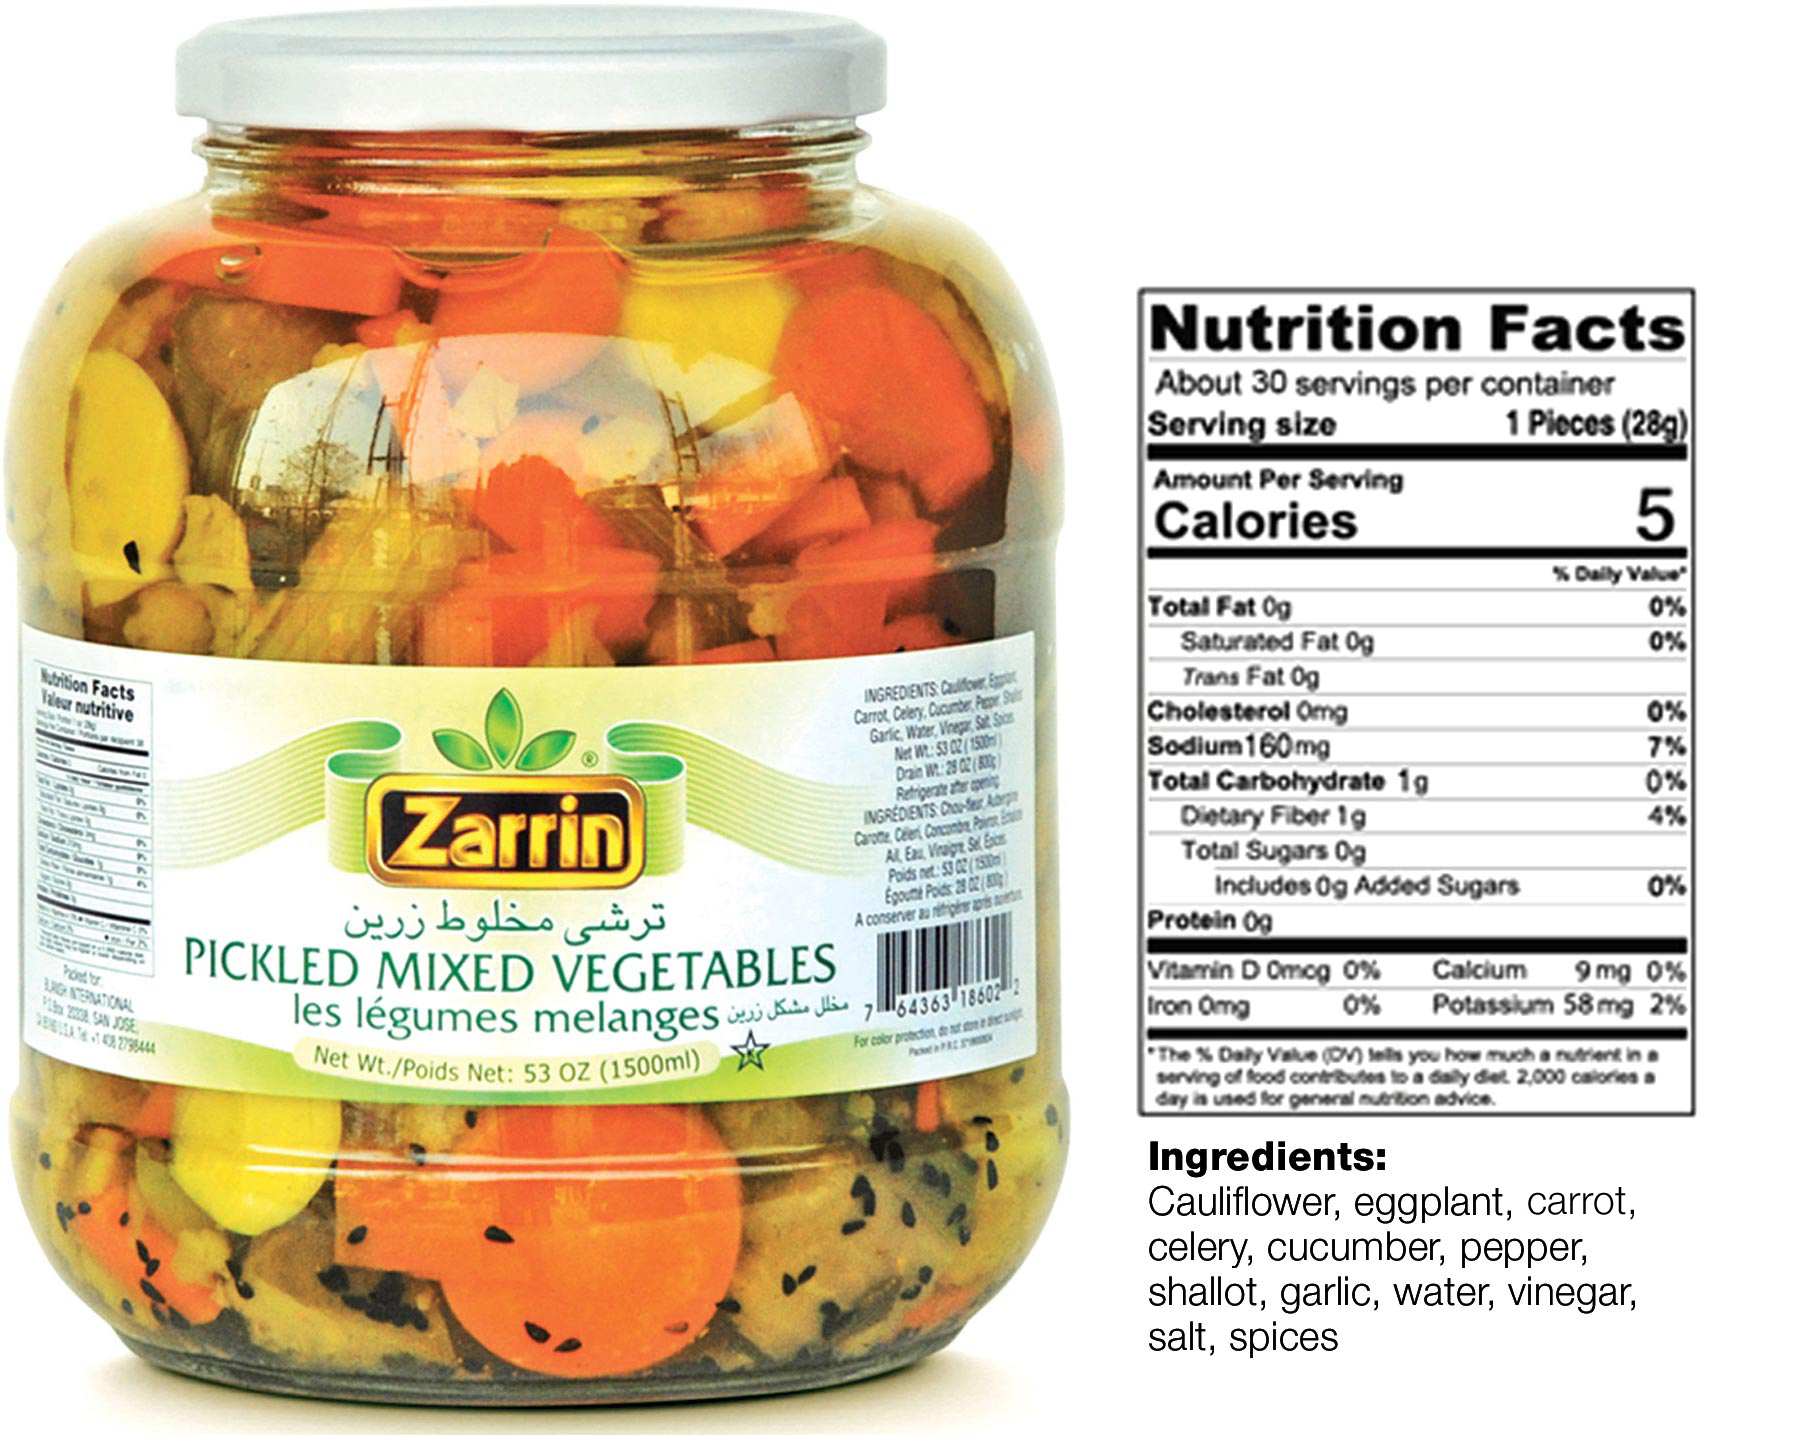 Pickled mixed vegetables by Zarrin. Net weight 53oz.